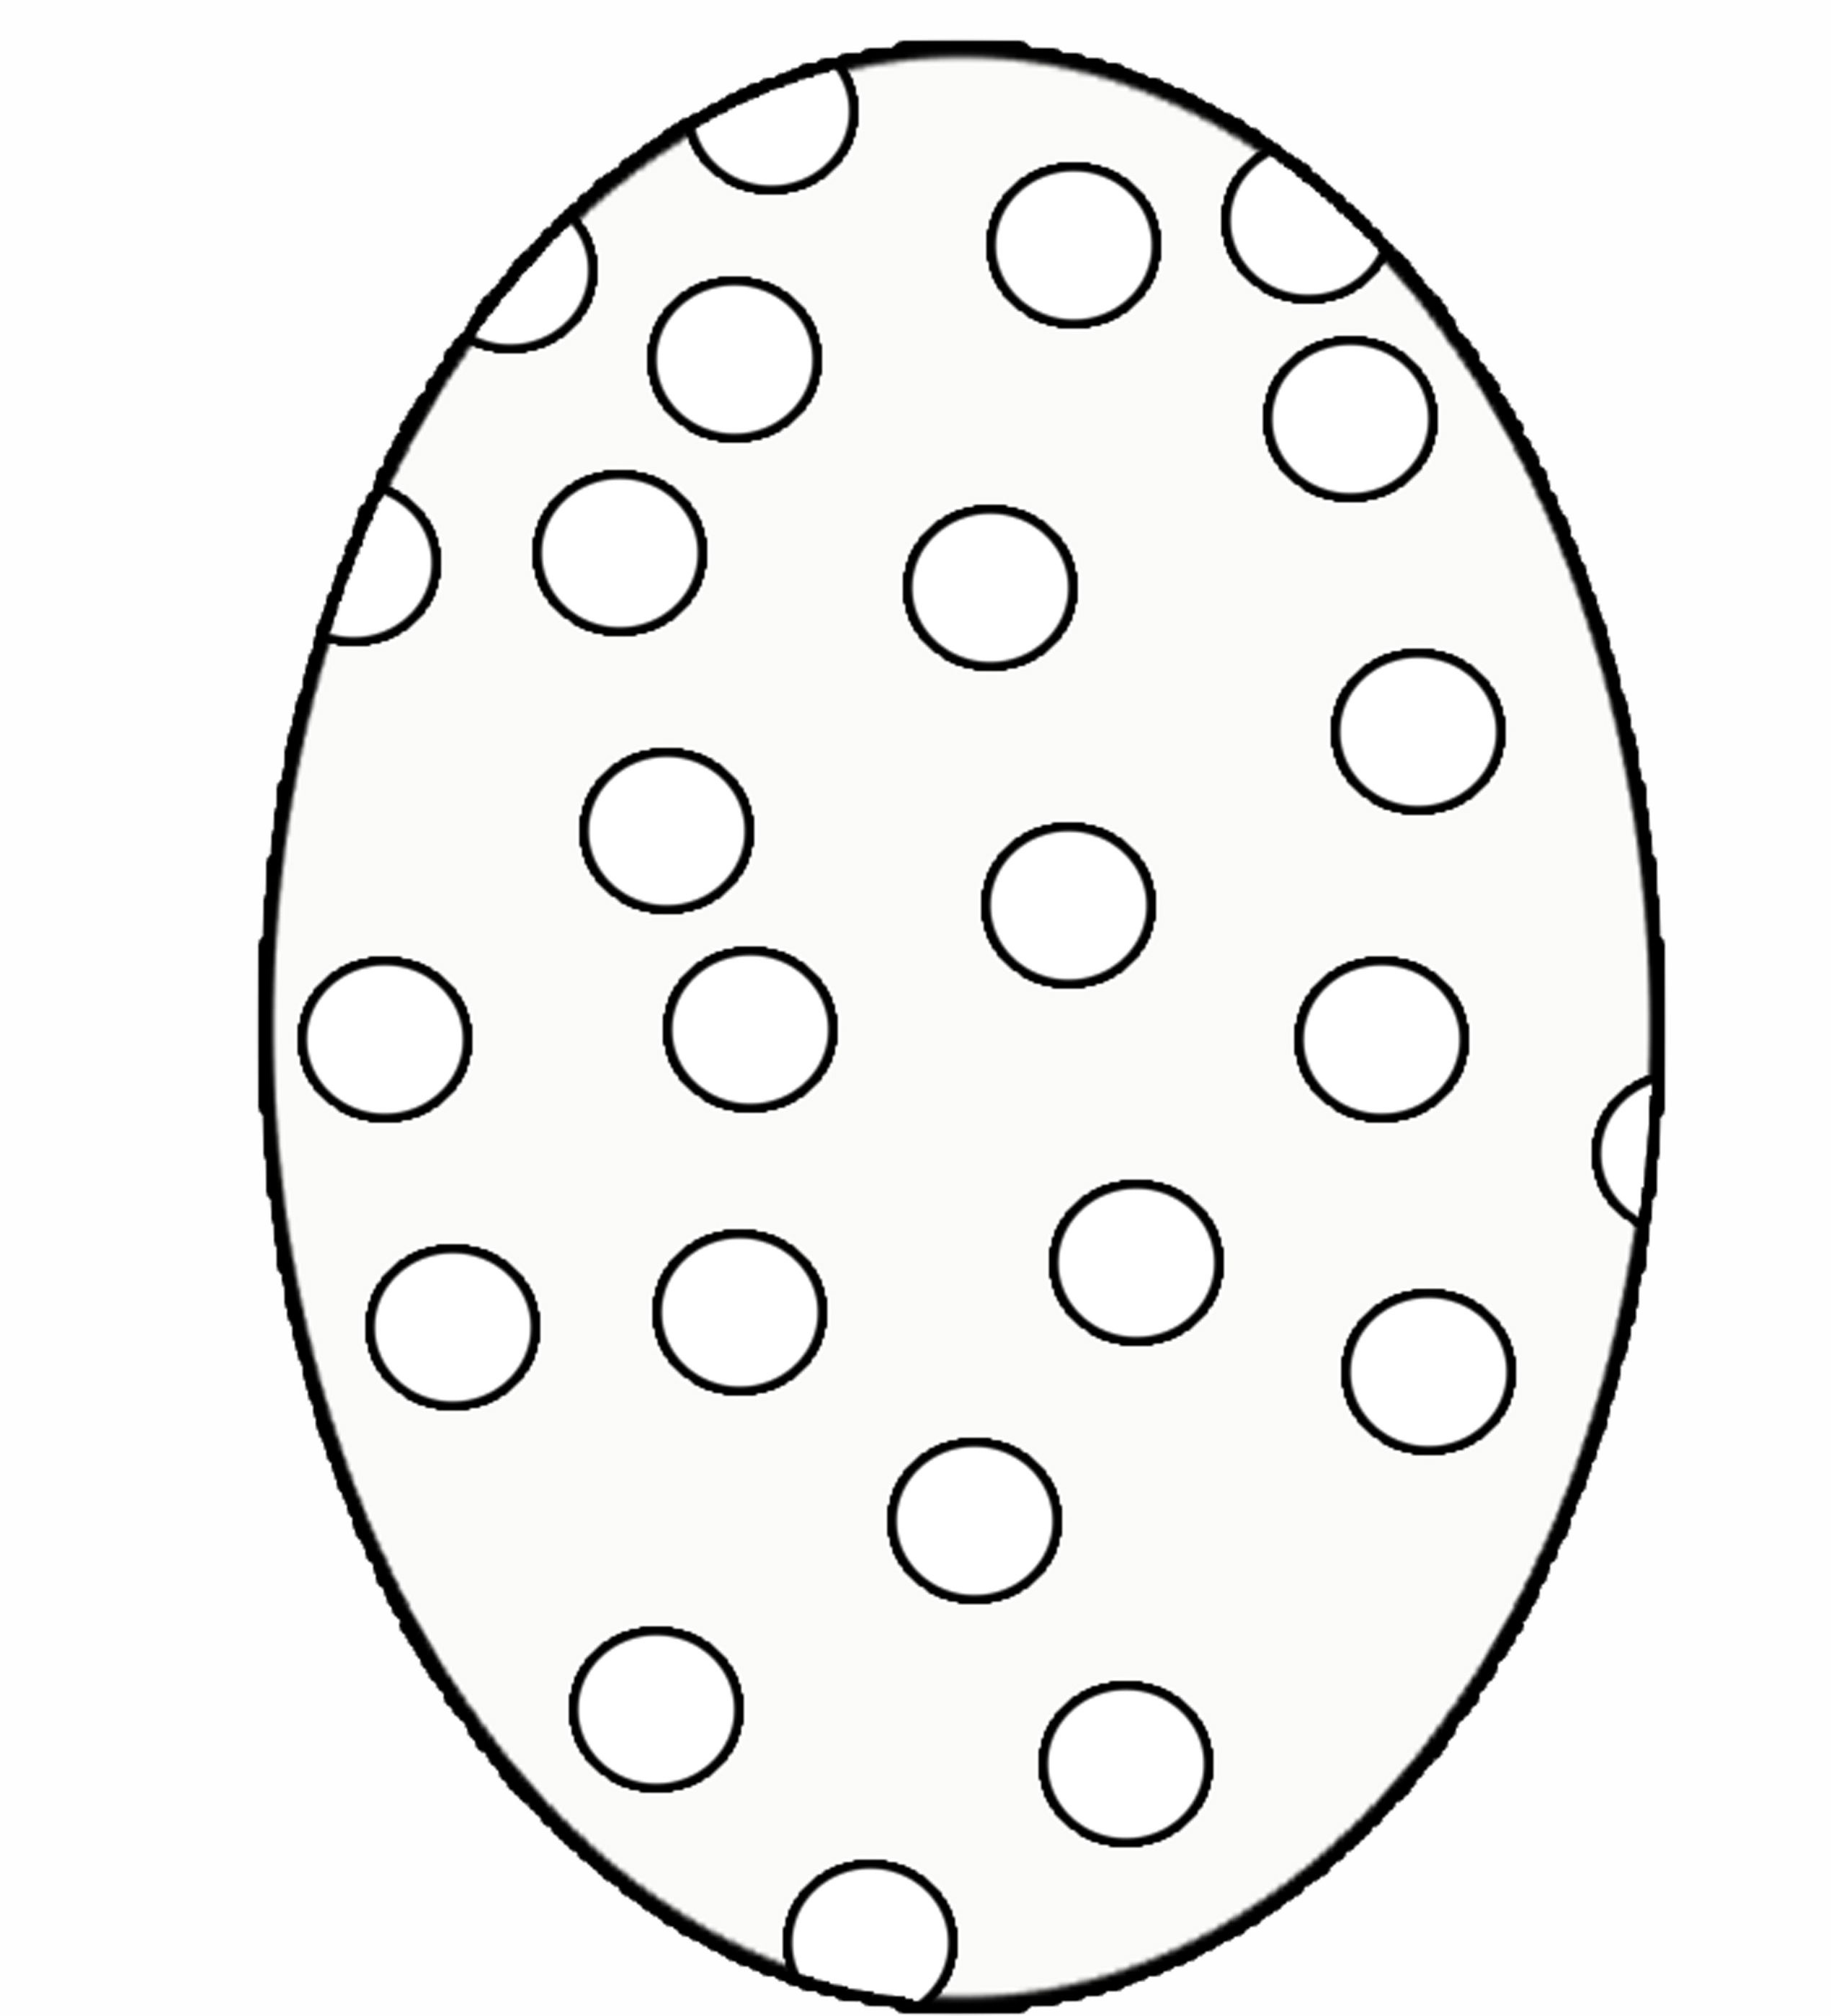 Free Printable Easter Egg Coloring Pages For Kids | Coloring Page - Easter Egg Template Free Printable